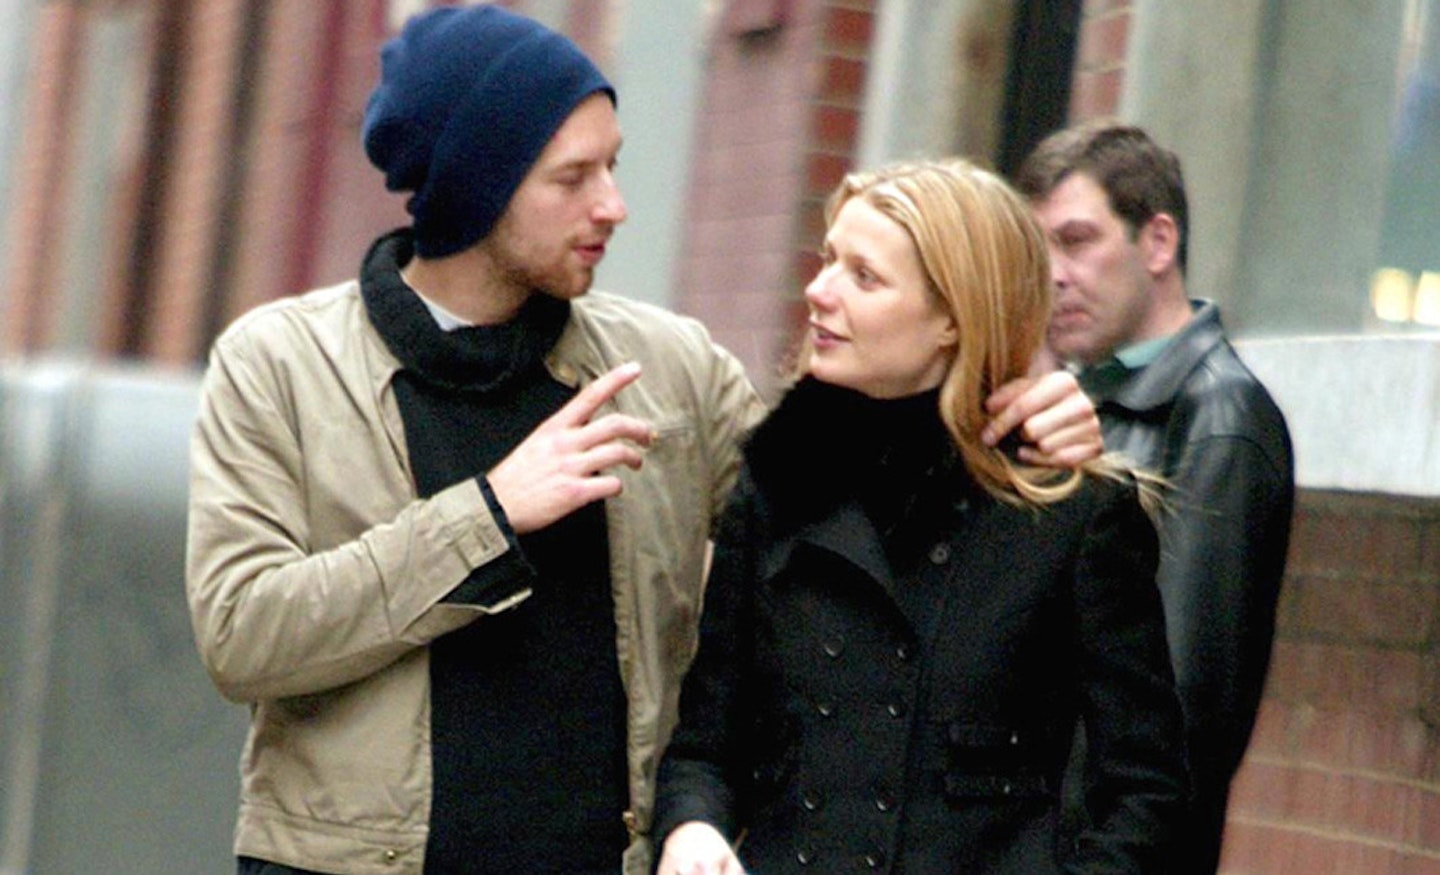 Gwyneth-Paltrow-And-Chris-Martin-Are-Divorcing-After-10-Years-Of-Marriage-7